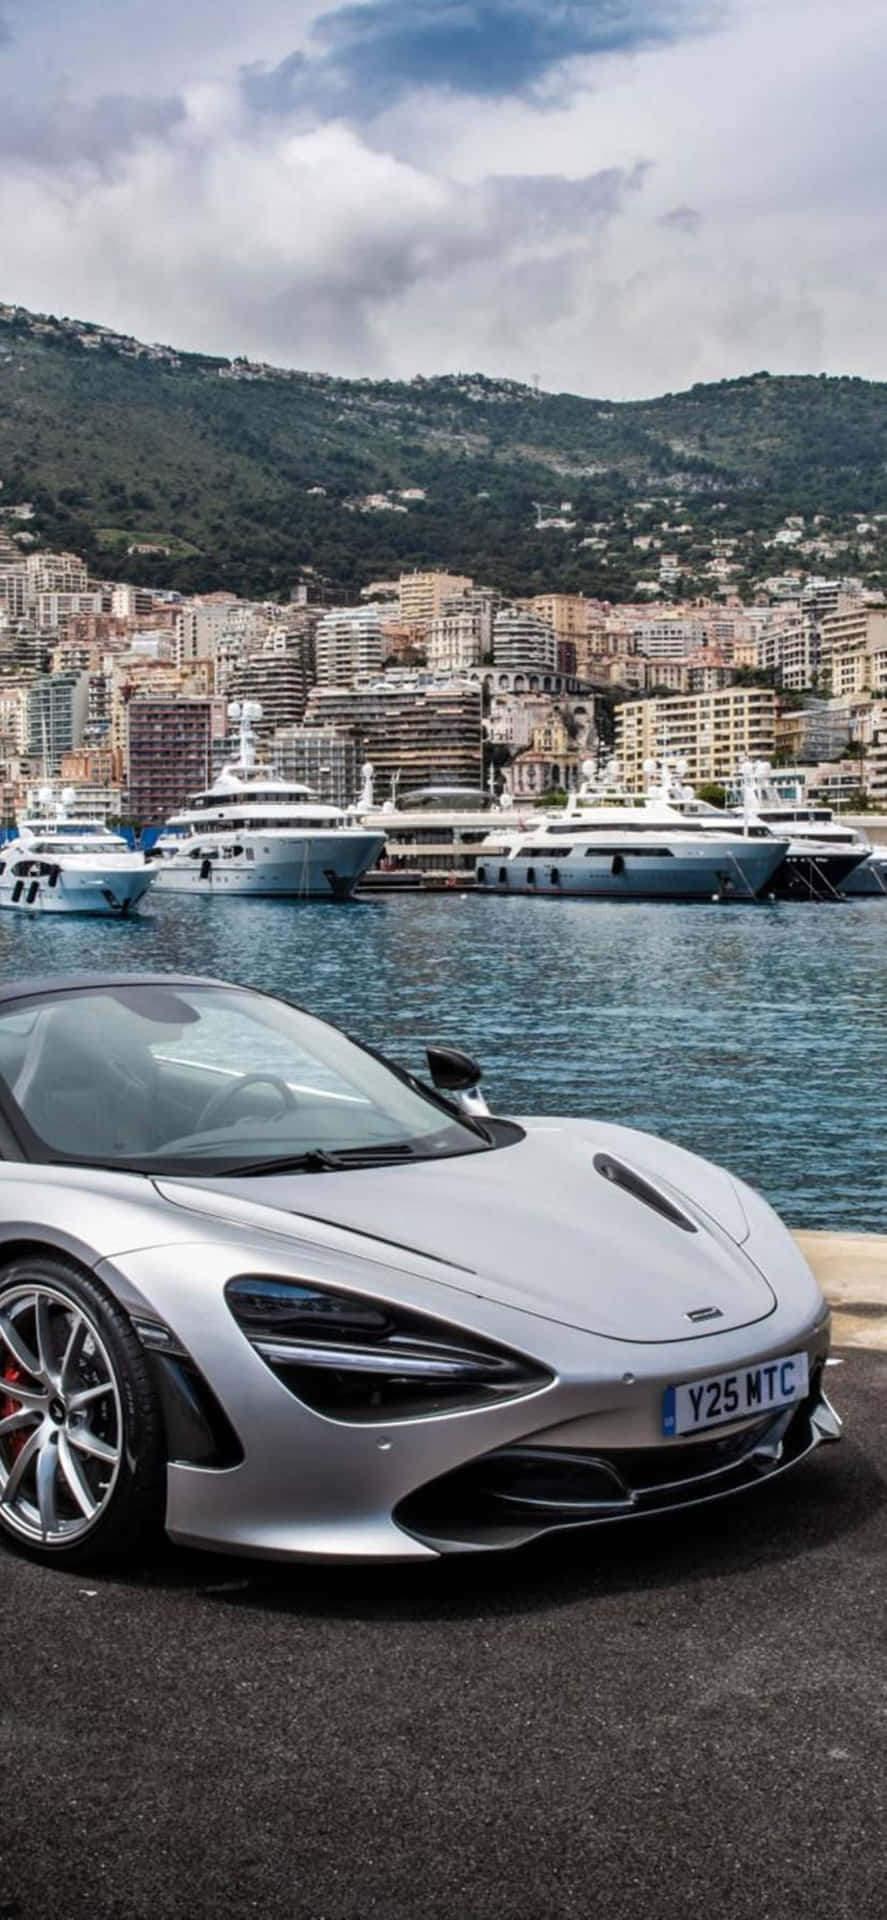 Iphone Xs Max Mclaren 720s Background Pearl White